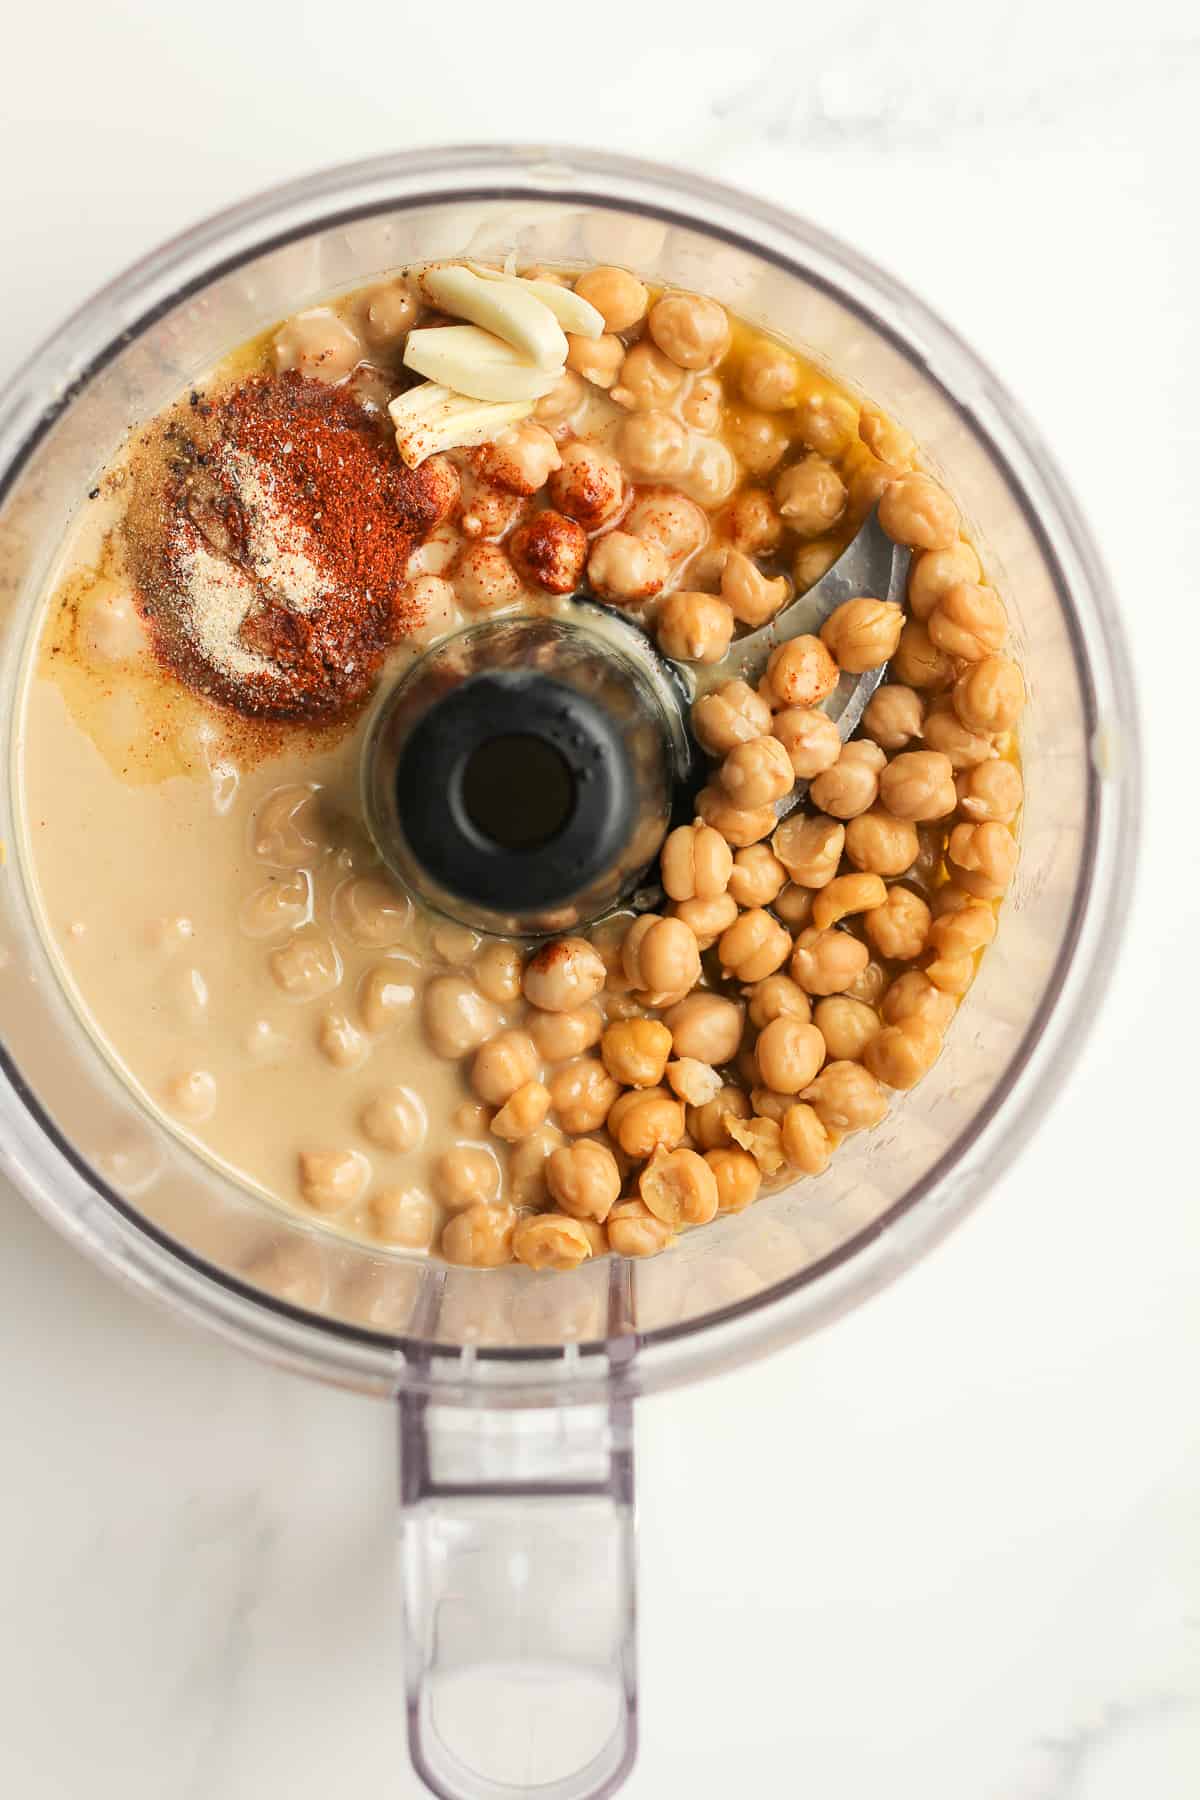 A food processor of the hummus ingredients before processing.